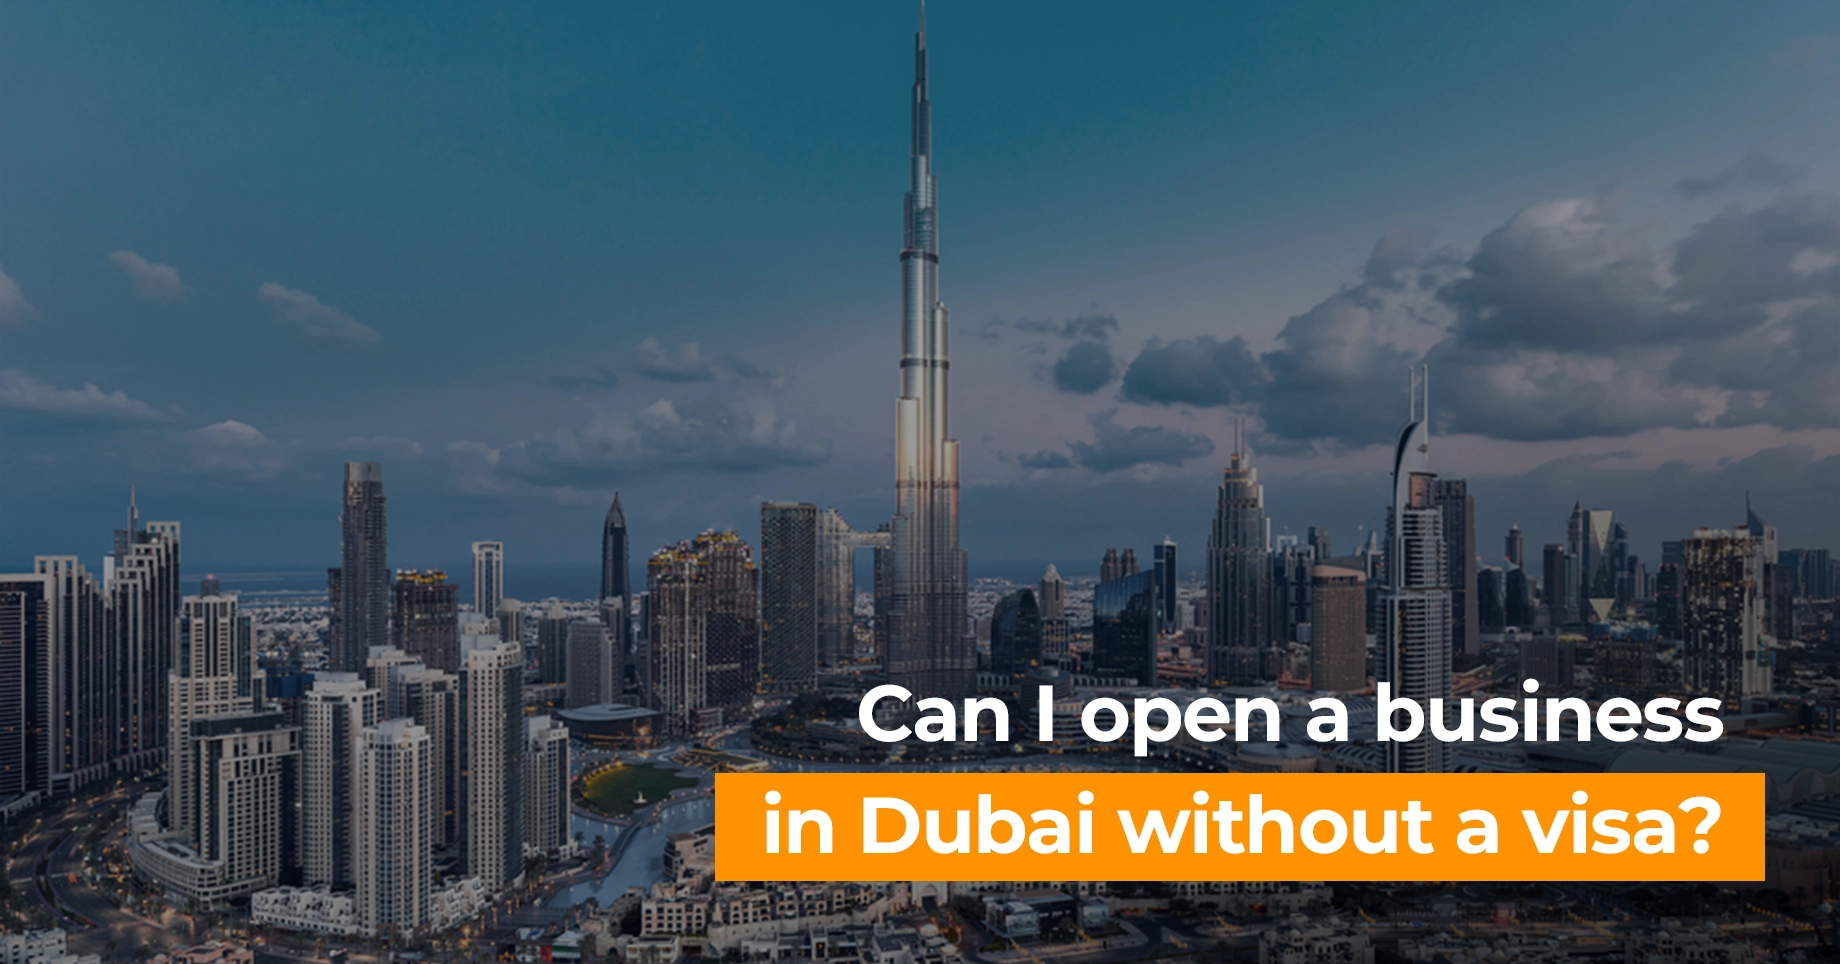 Can I open a business in Dubai without a visa?